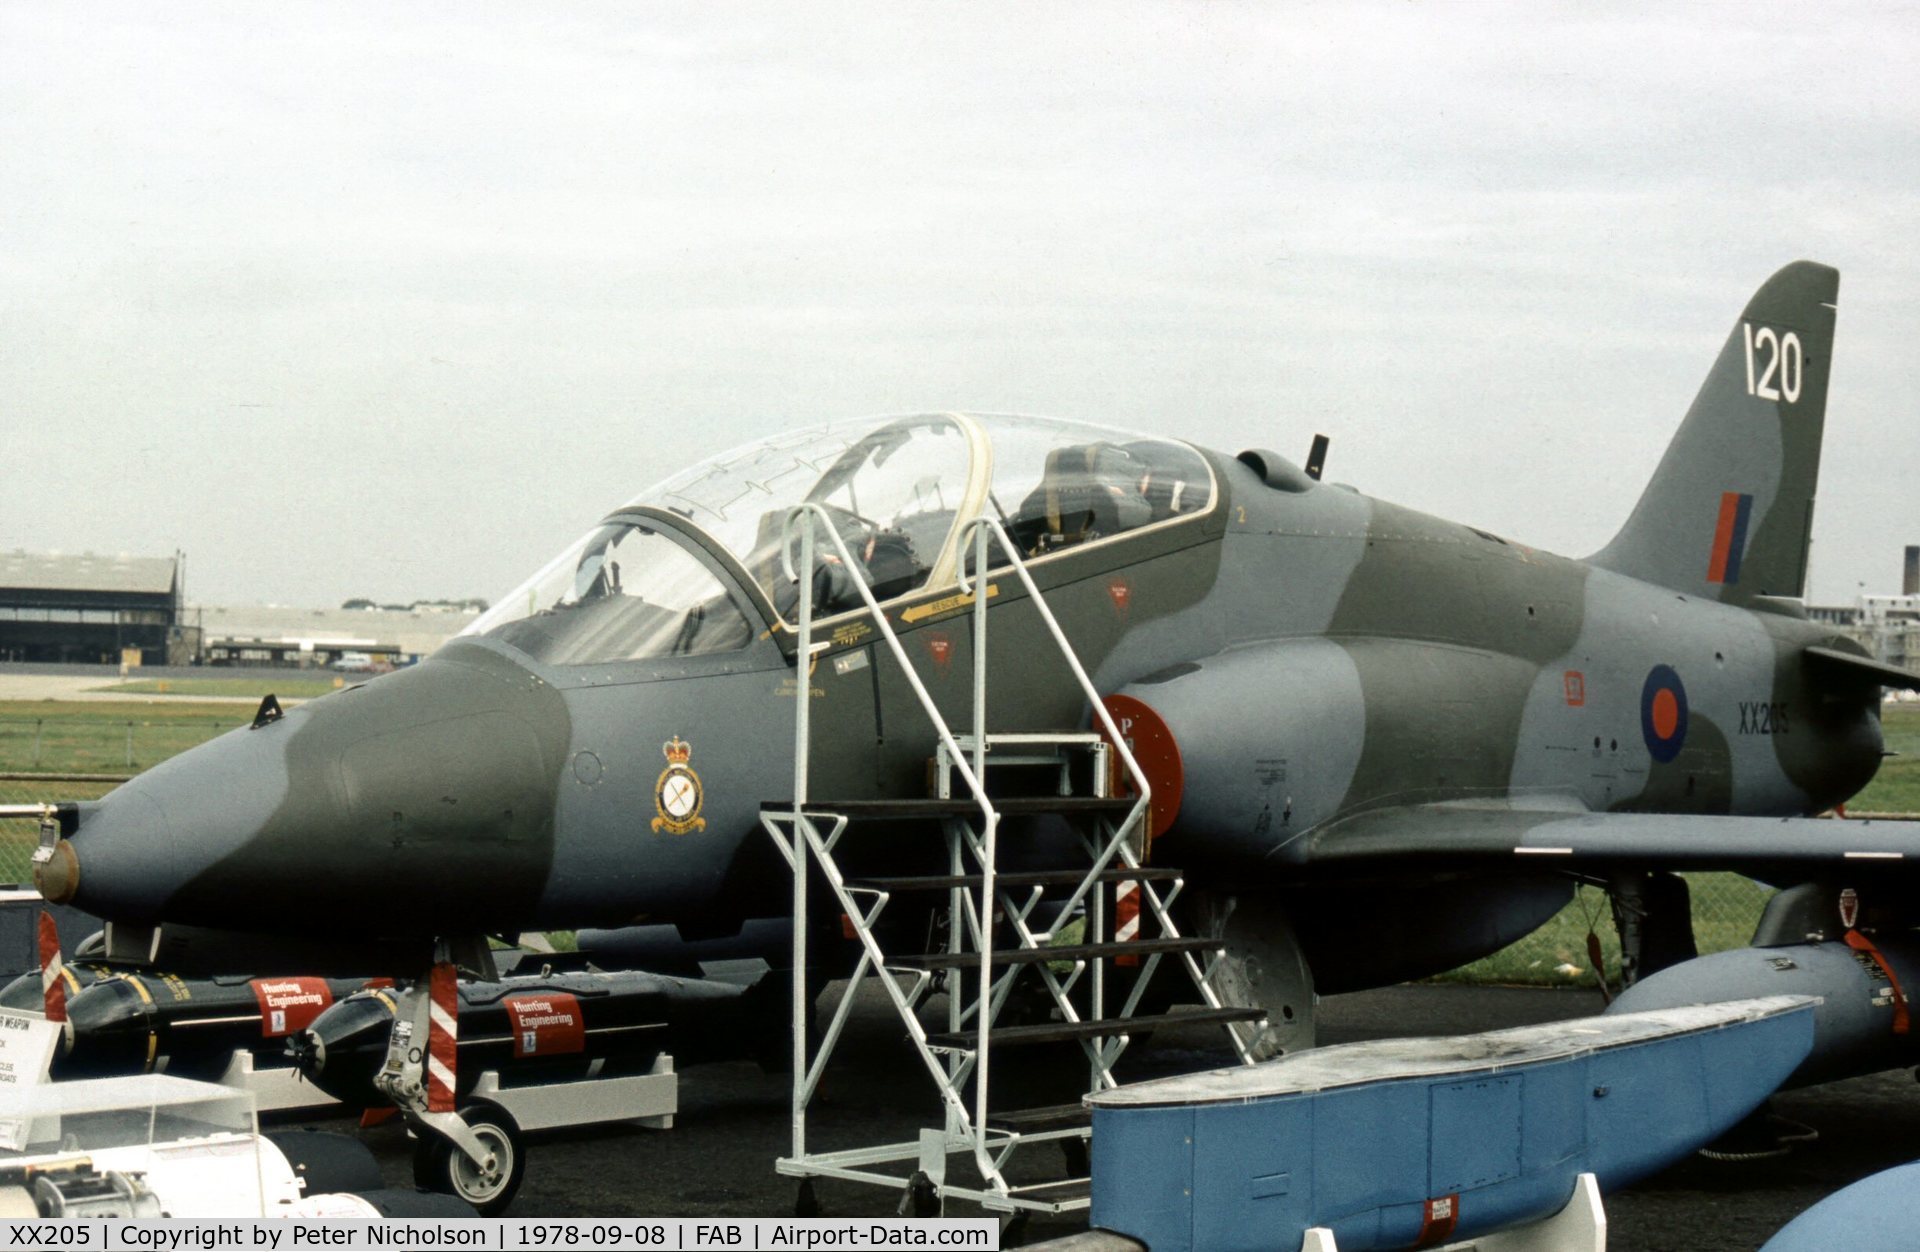 XX205, 1978 Hawker Siddeley Hawk T.1 C/N 052/312052, Mixed weapons load around this Tactical Weapons Unit Hawk T.1 as displayed at the 1978 Farnborough Air Show.